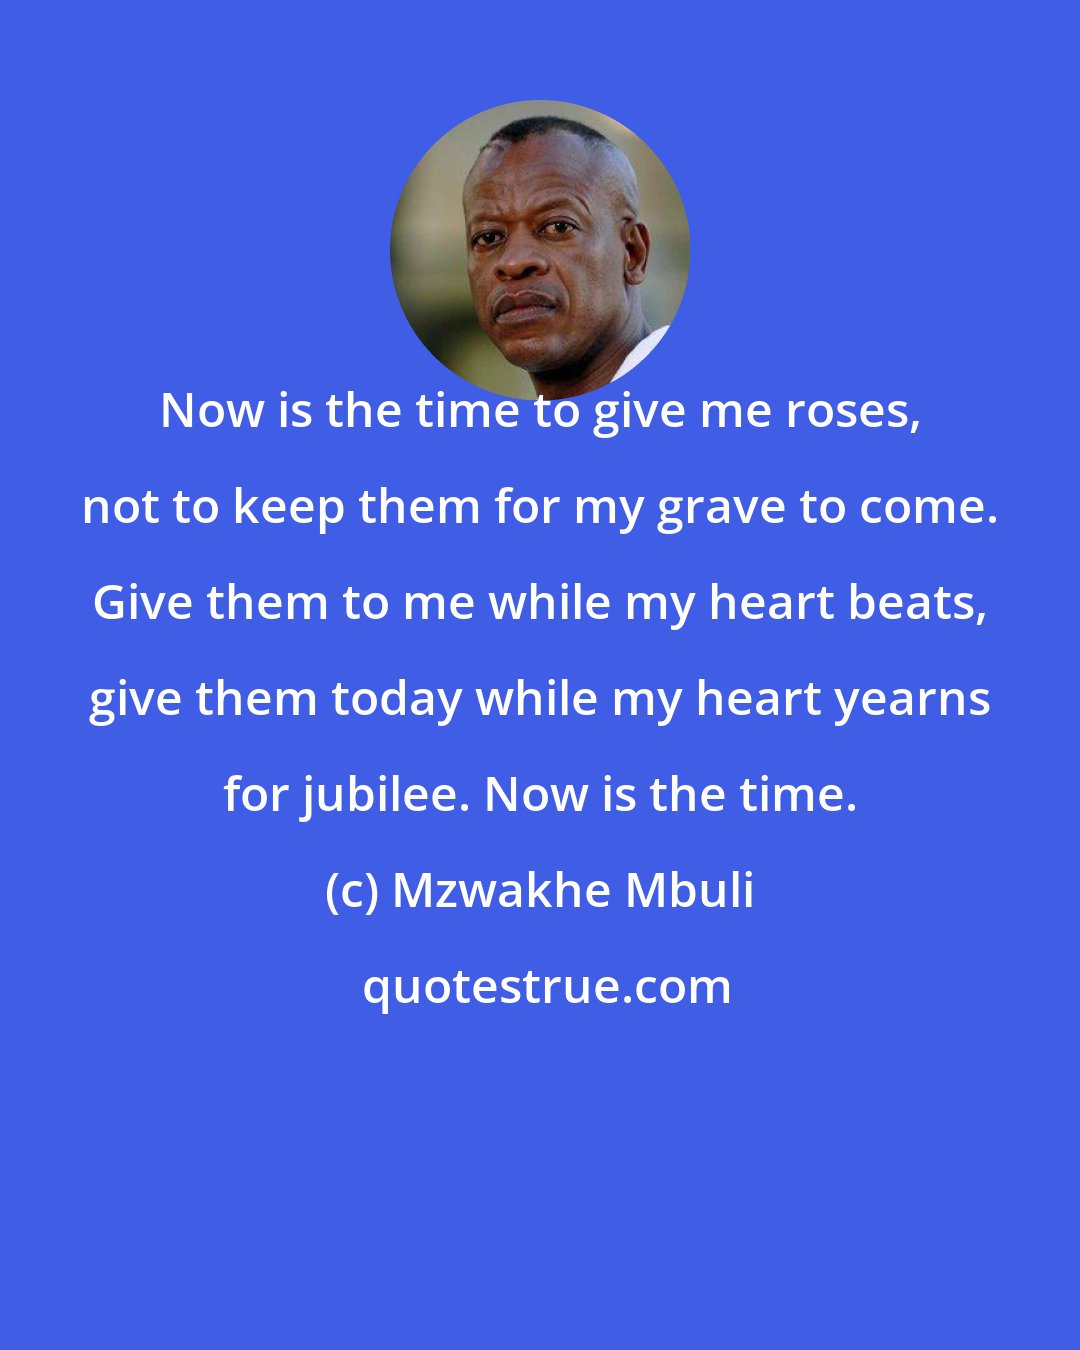 Mzwakhe Mbuli: Now is the time to give me roses, not to keep them for my grave to come. Give them to me while my heart beats, give them today while my heart yearns for jubilee. Now is the time.